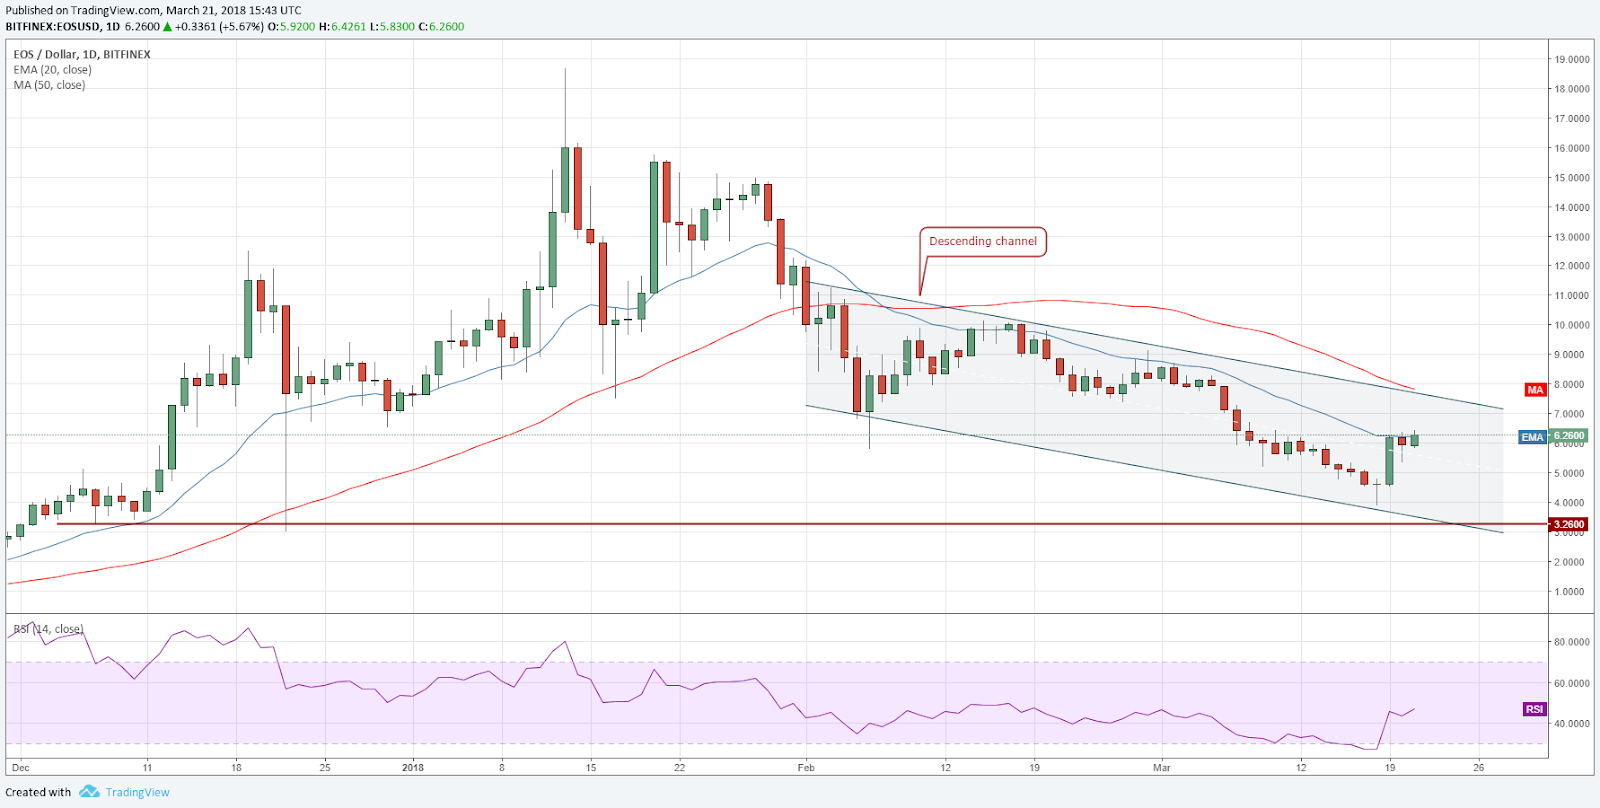 Bitcoin Price Technical Analysis for 23 Mar 2018 â€“ Another Reversal Pattern